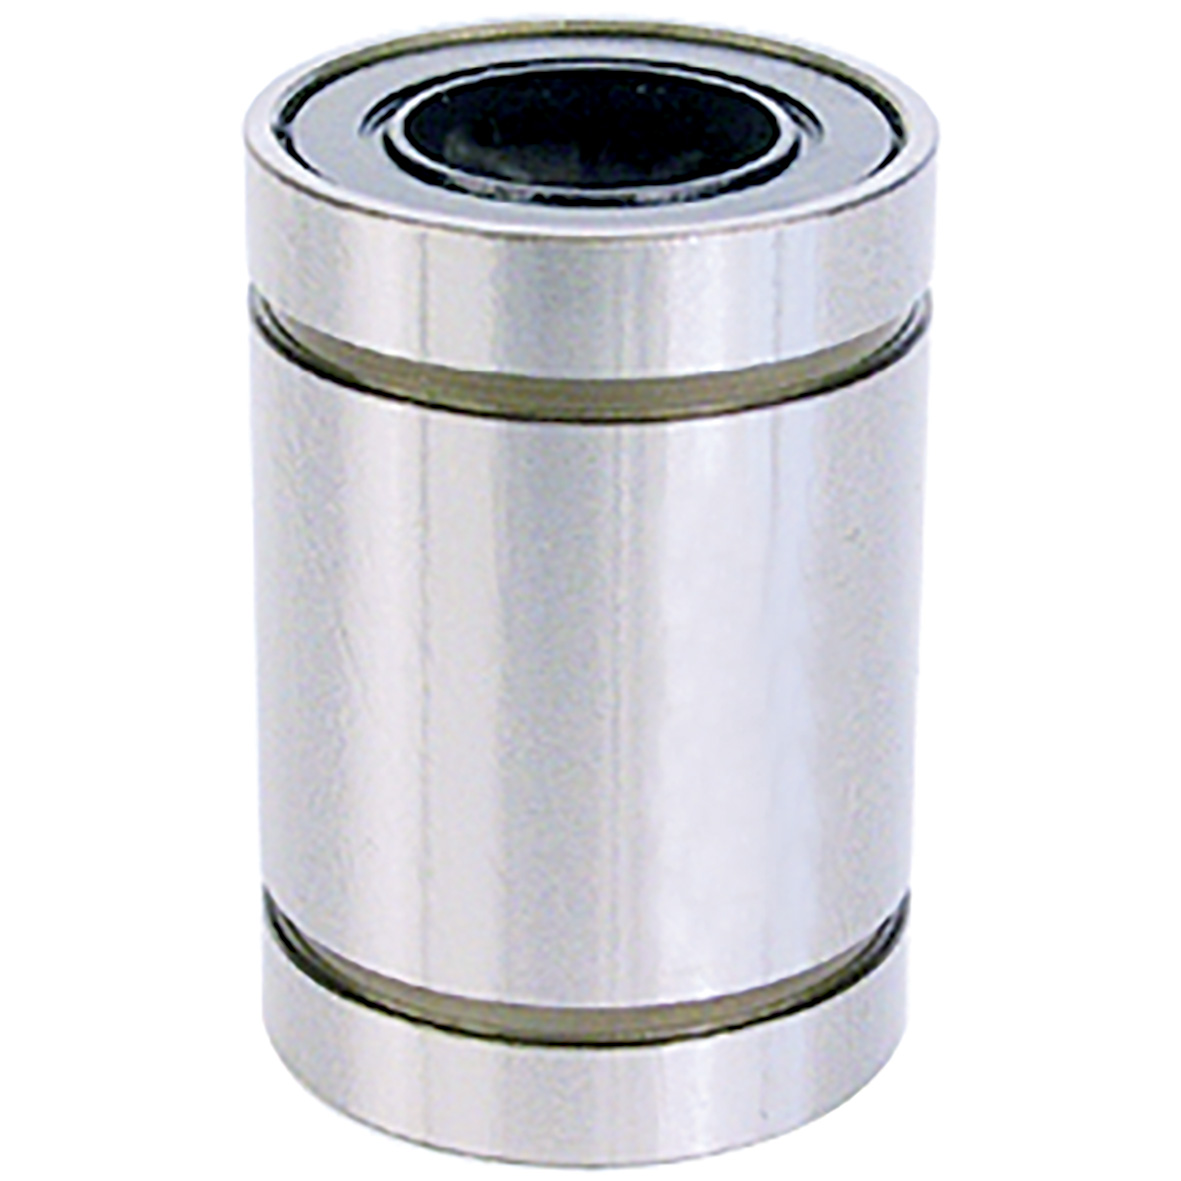 Closed linear precision bearing - Precision - steel - Closed - Steel / steel